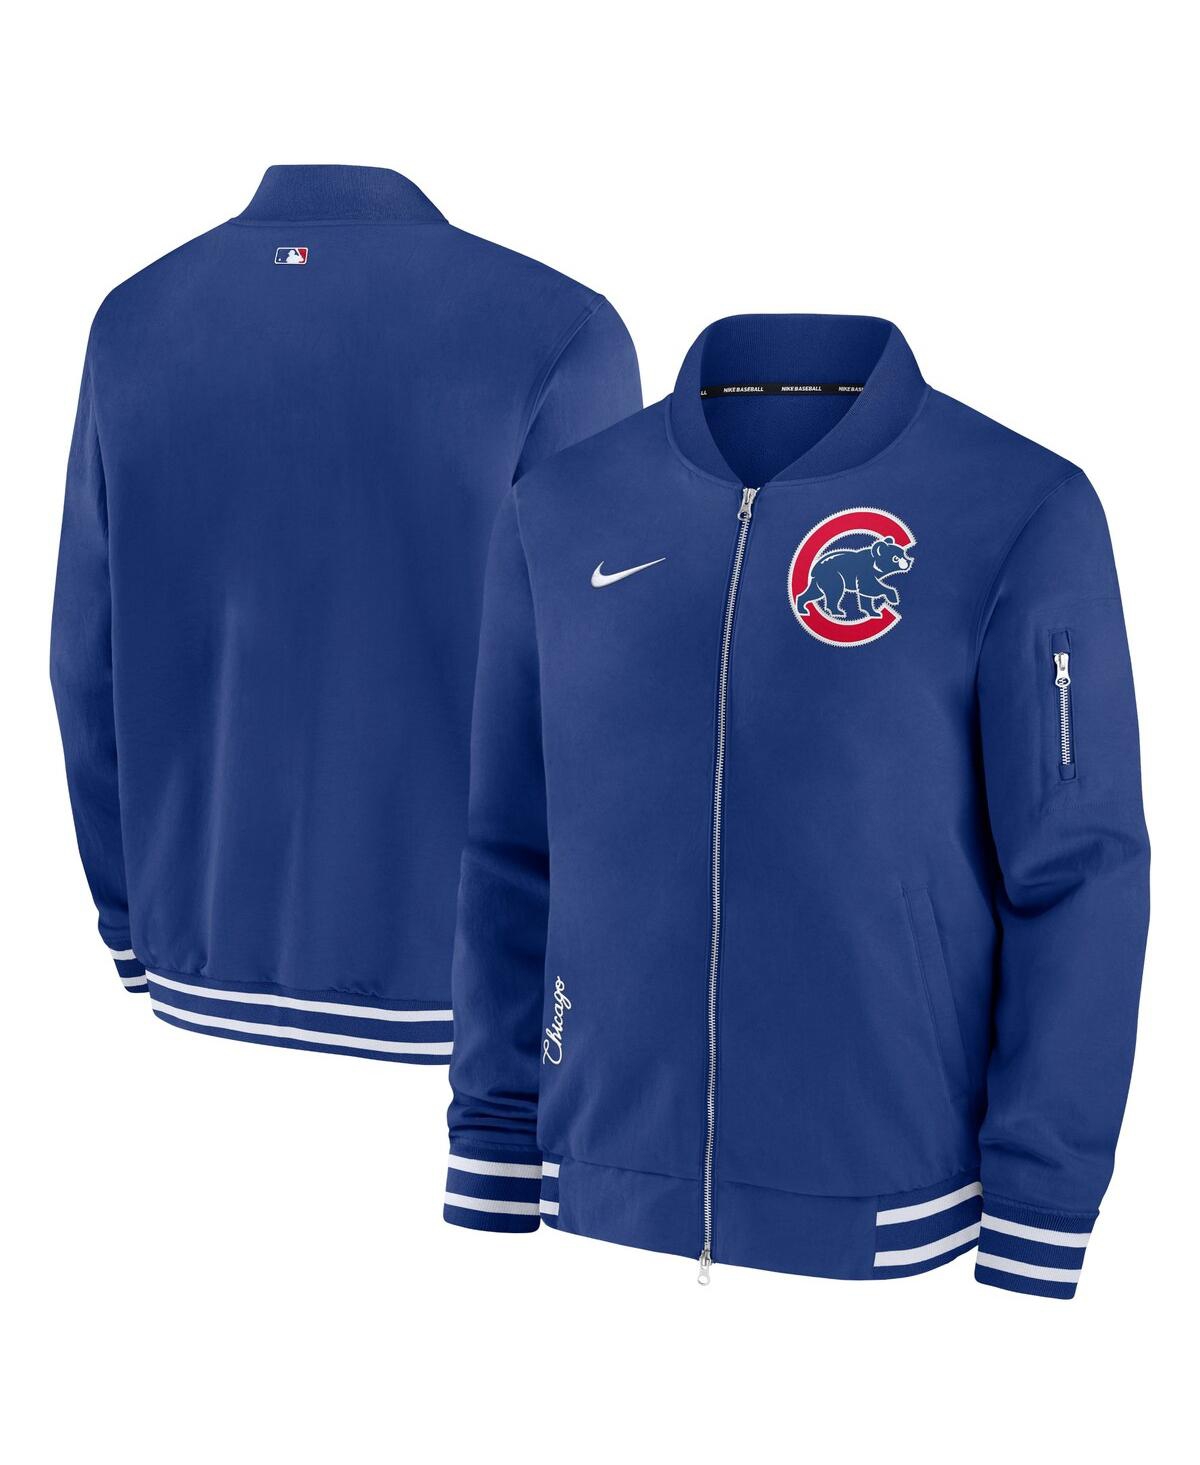 Men's Nike Royal Chicago Cubs Authentic Collection Full-Zip Bomber Jacket - Royal